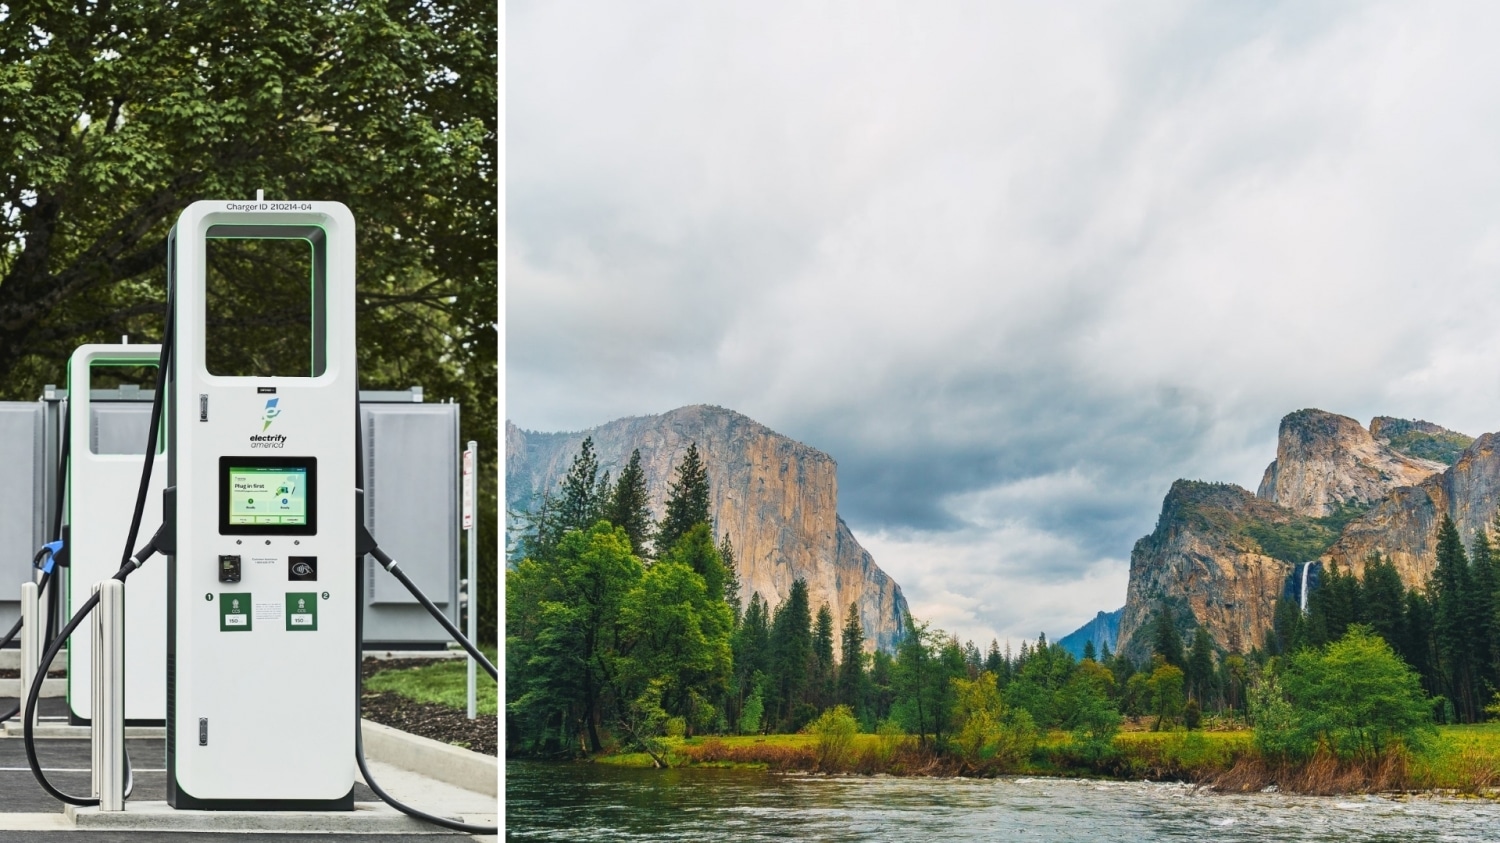 Electrify America Adds Ultra-Fast Electric Vehicle Charging Serving Travelers to Yosemite National Park with New Yosemite Westgate Lodge Station